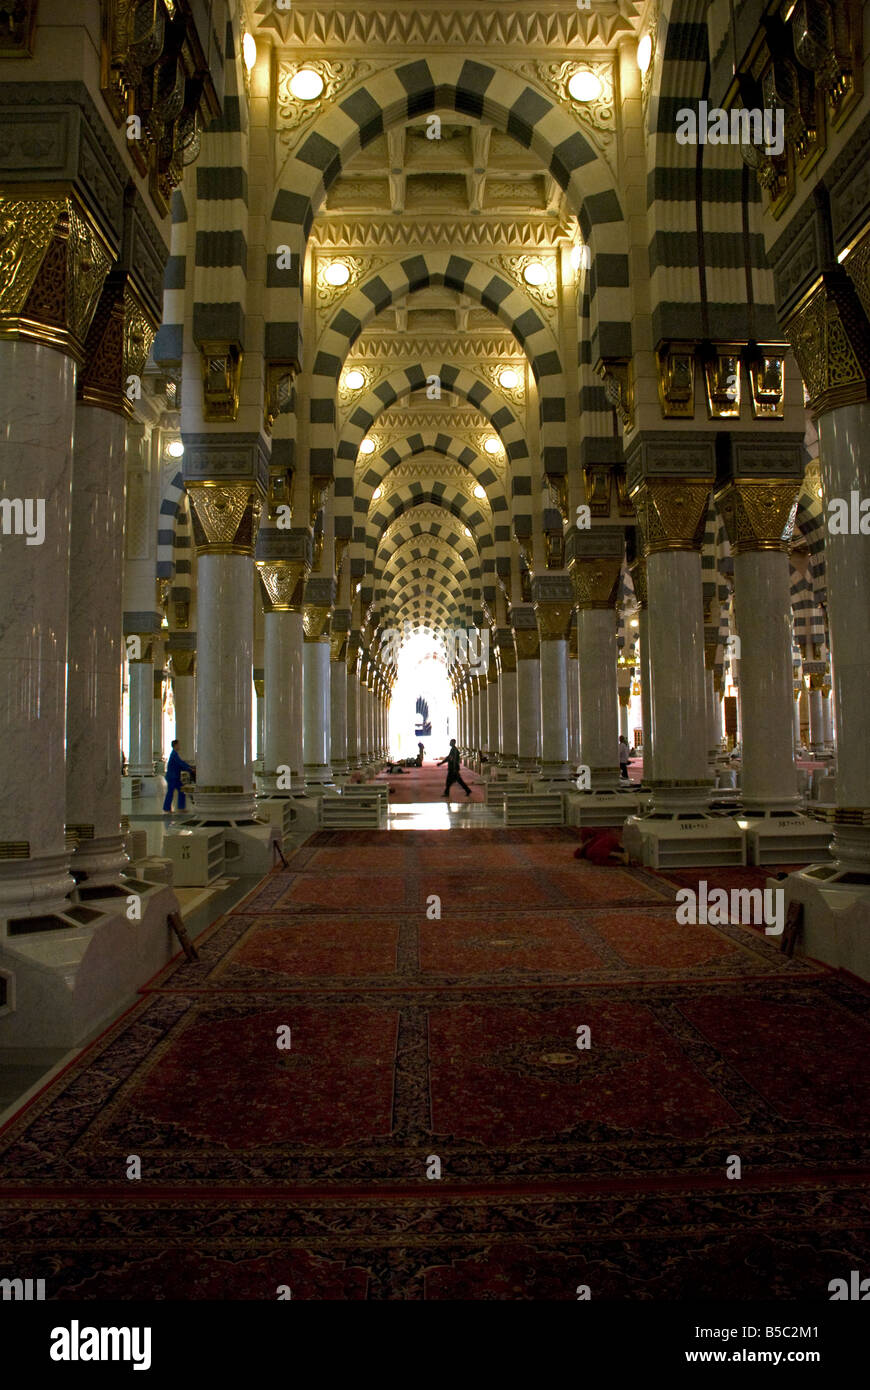 The interior of one of the extensions of Masjid al Nabawi in Madinah Saudi Arabia Stock Photo